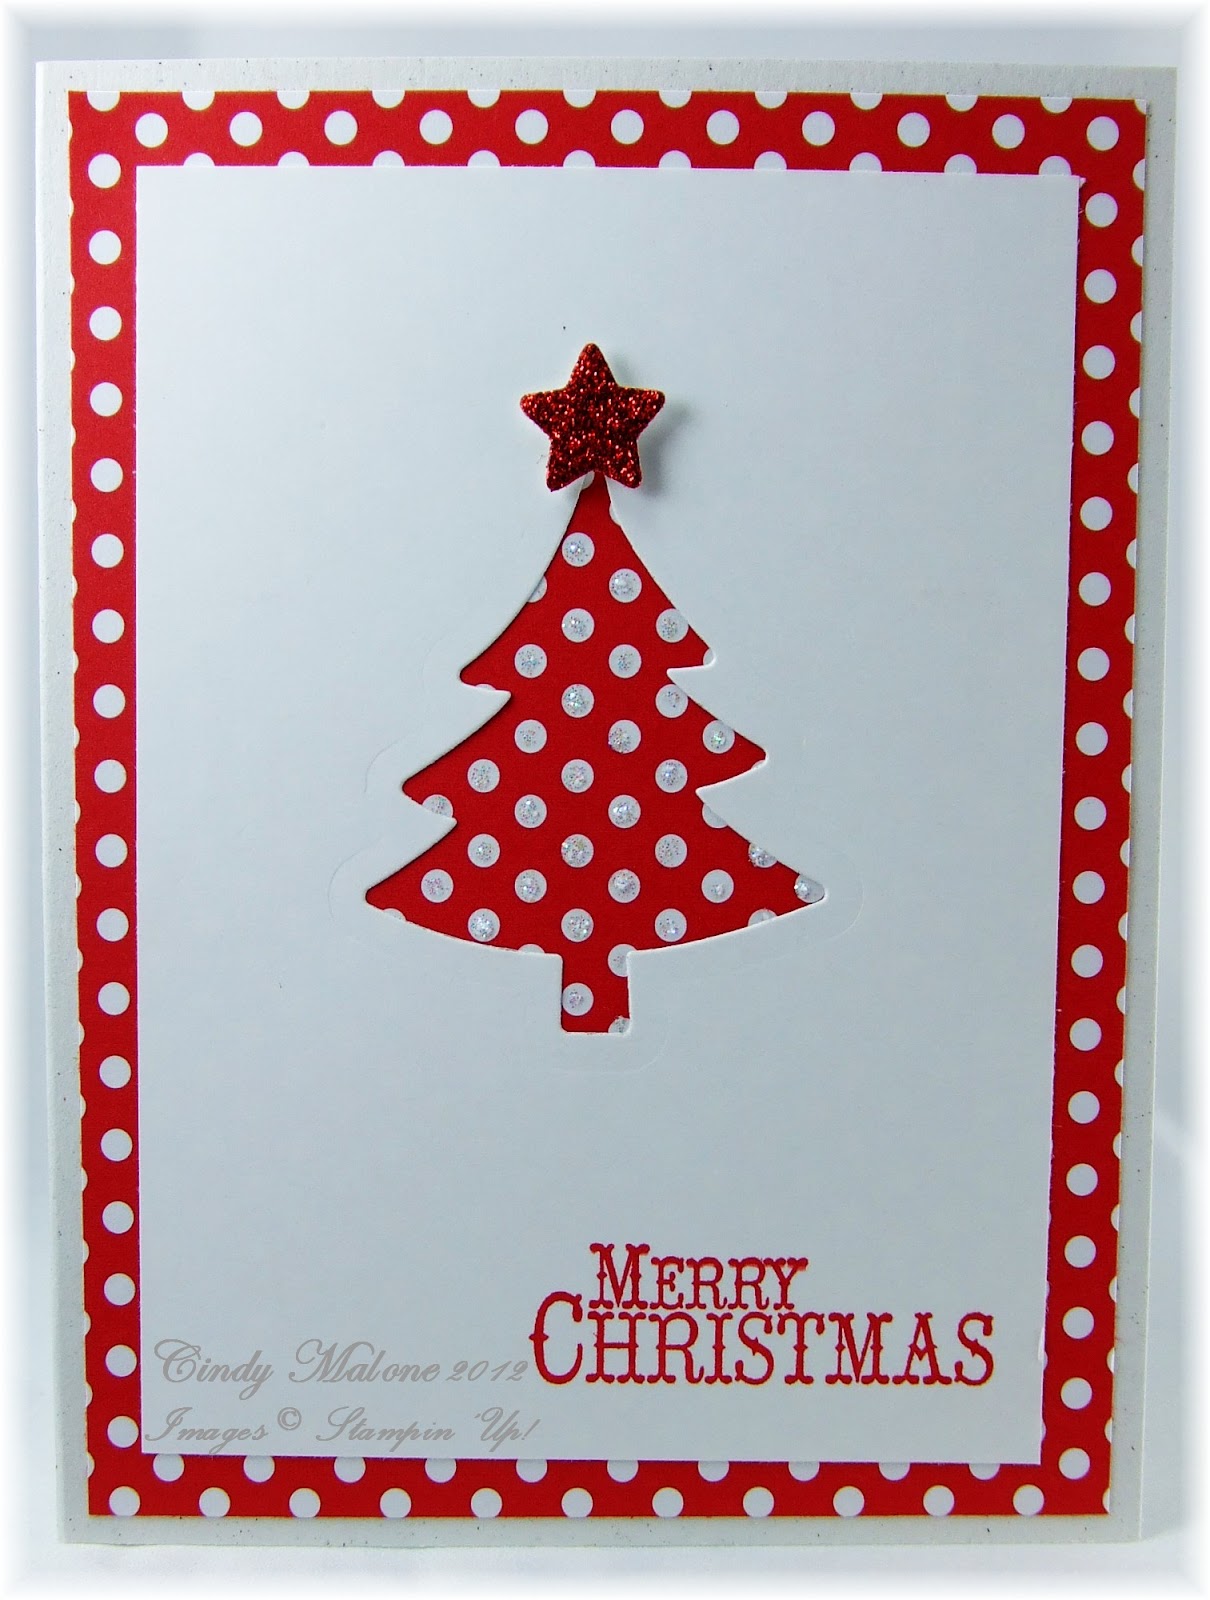 Discover Stamping: Easy Christmas Card